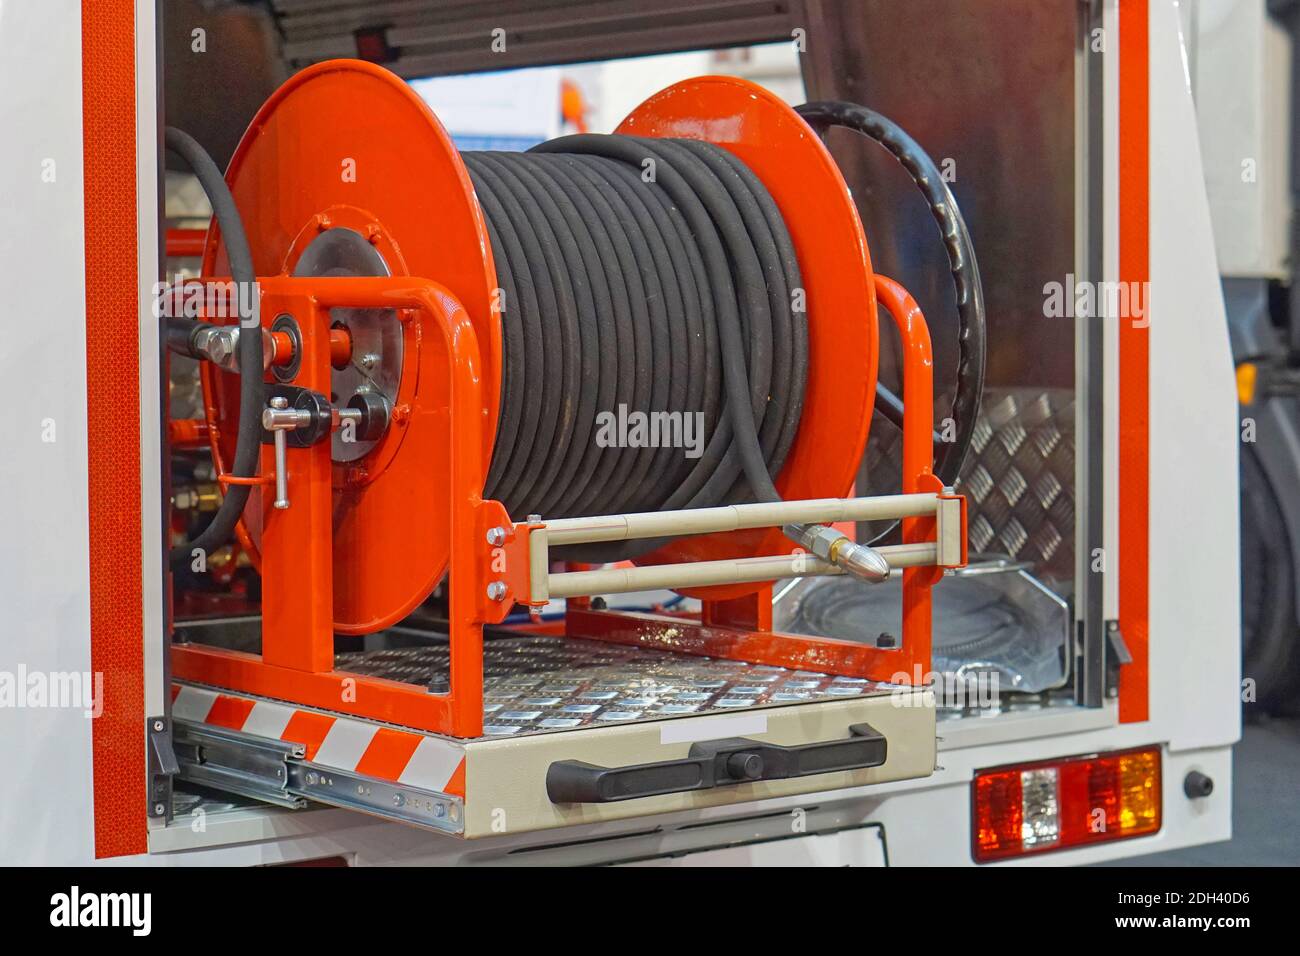 High Pressure fire hose reel at truck engine Stock Photo - Alamy